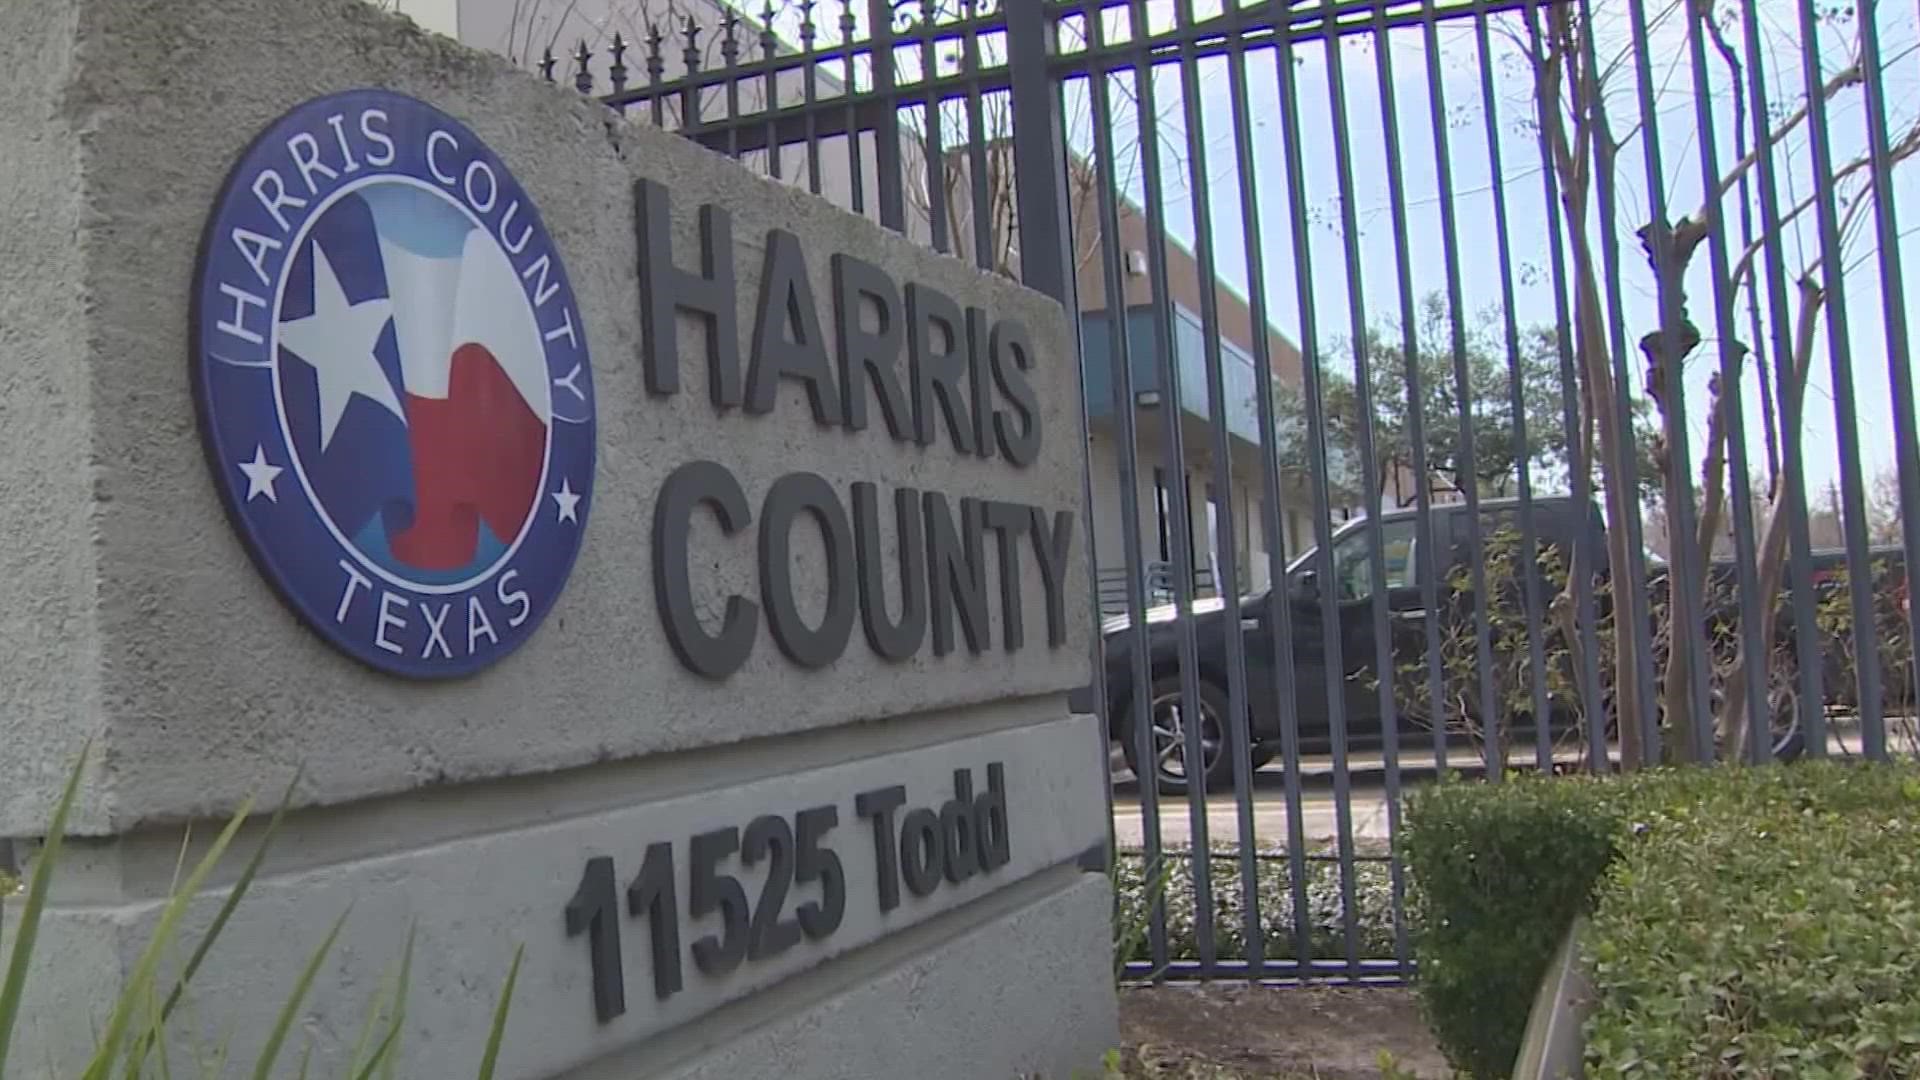 The Harris County GOP said they were serious issues during the Texas Primary, but the county's election officials said things weren't that bad.